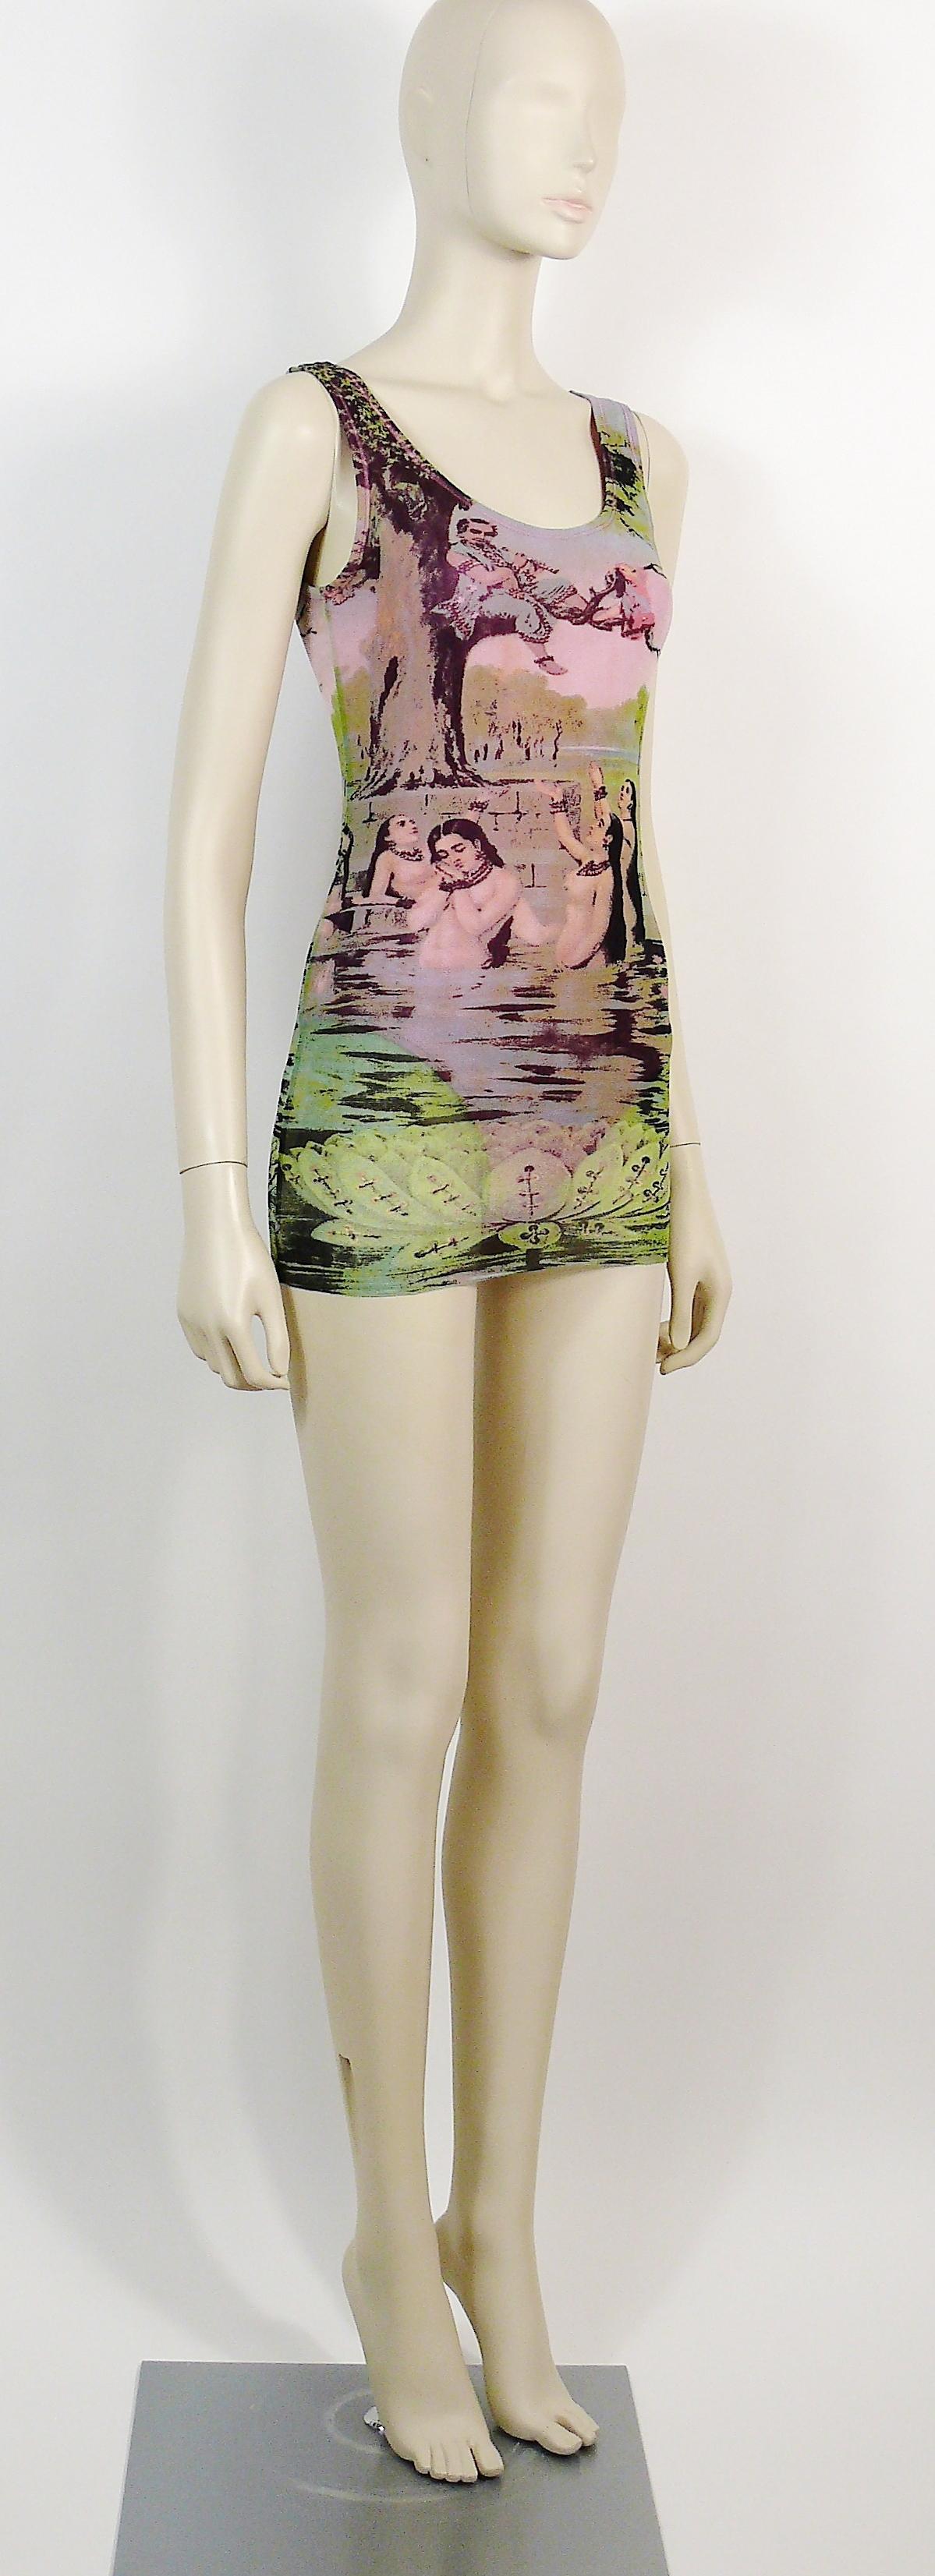 JEAN PAUL GAULTIER vintage FUZZI mesh tank micro mini dress featuring a gorgeous Oriental Bath scene print.

This dress is fully lined with a pink nylon bodysuit (snap button closure).

Label reads JEAN PAUL GAULTIER MAILLE Made in Italy.

Size tag